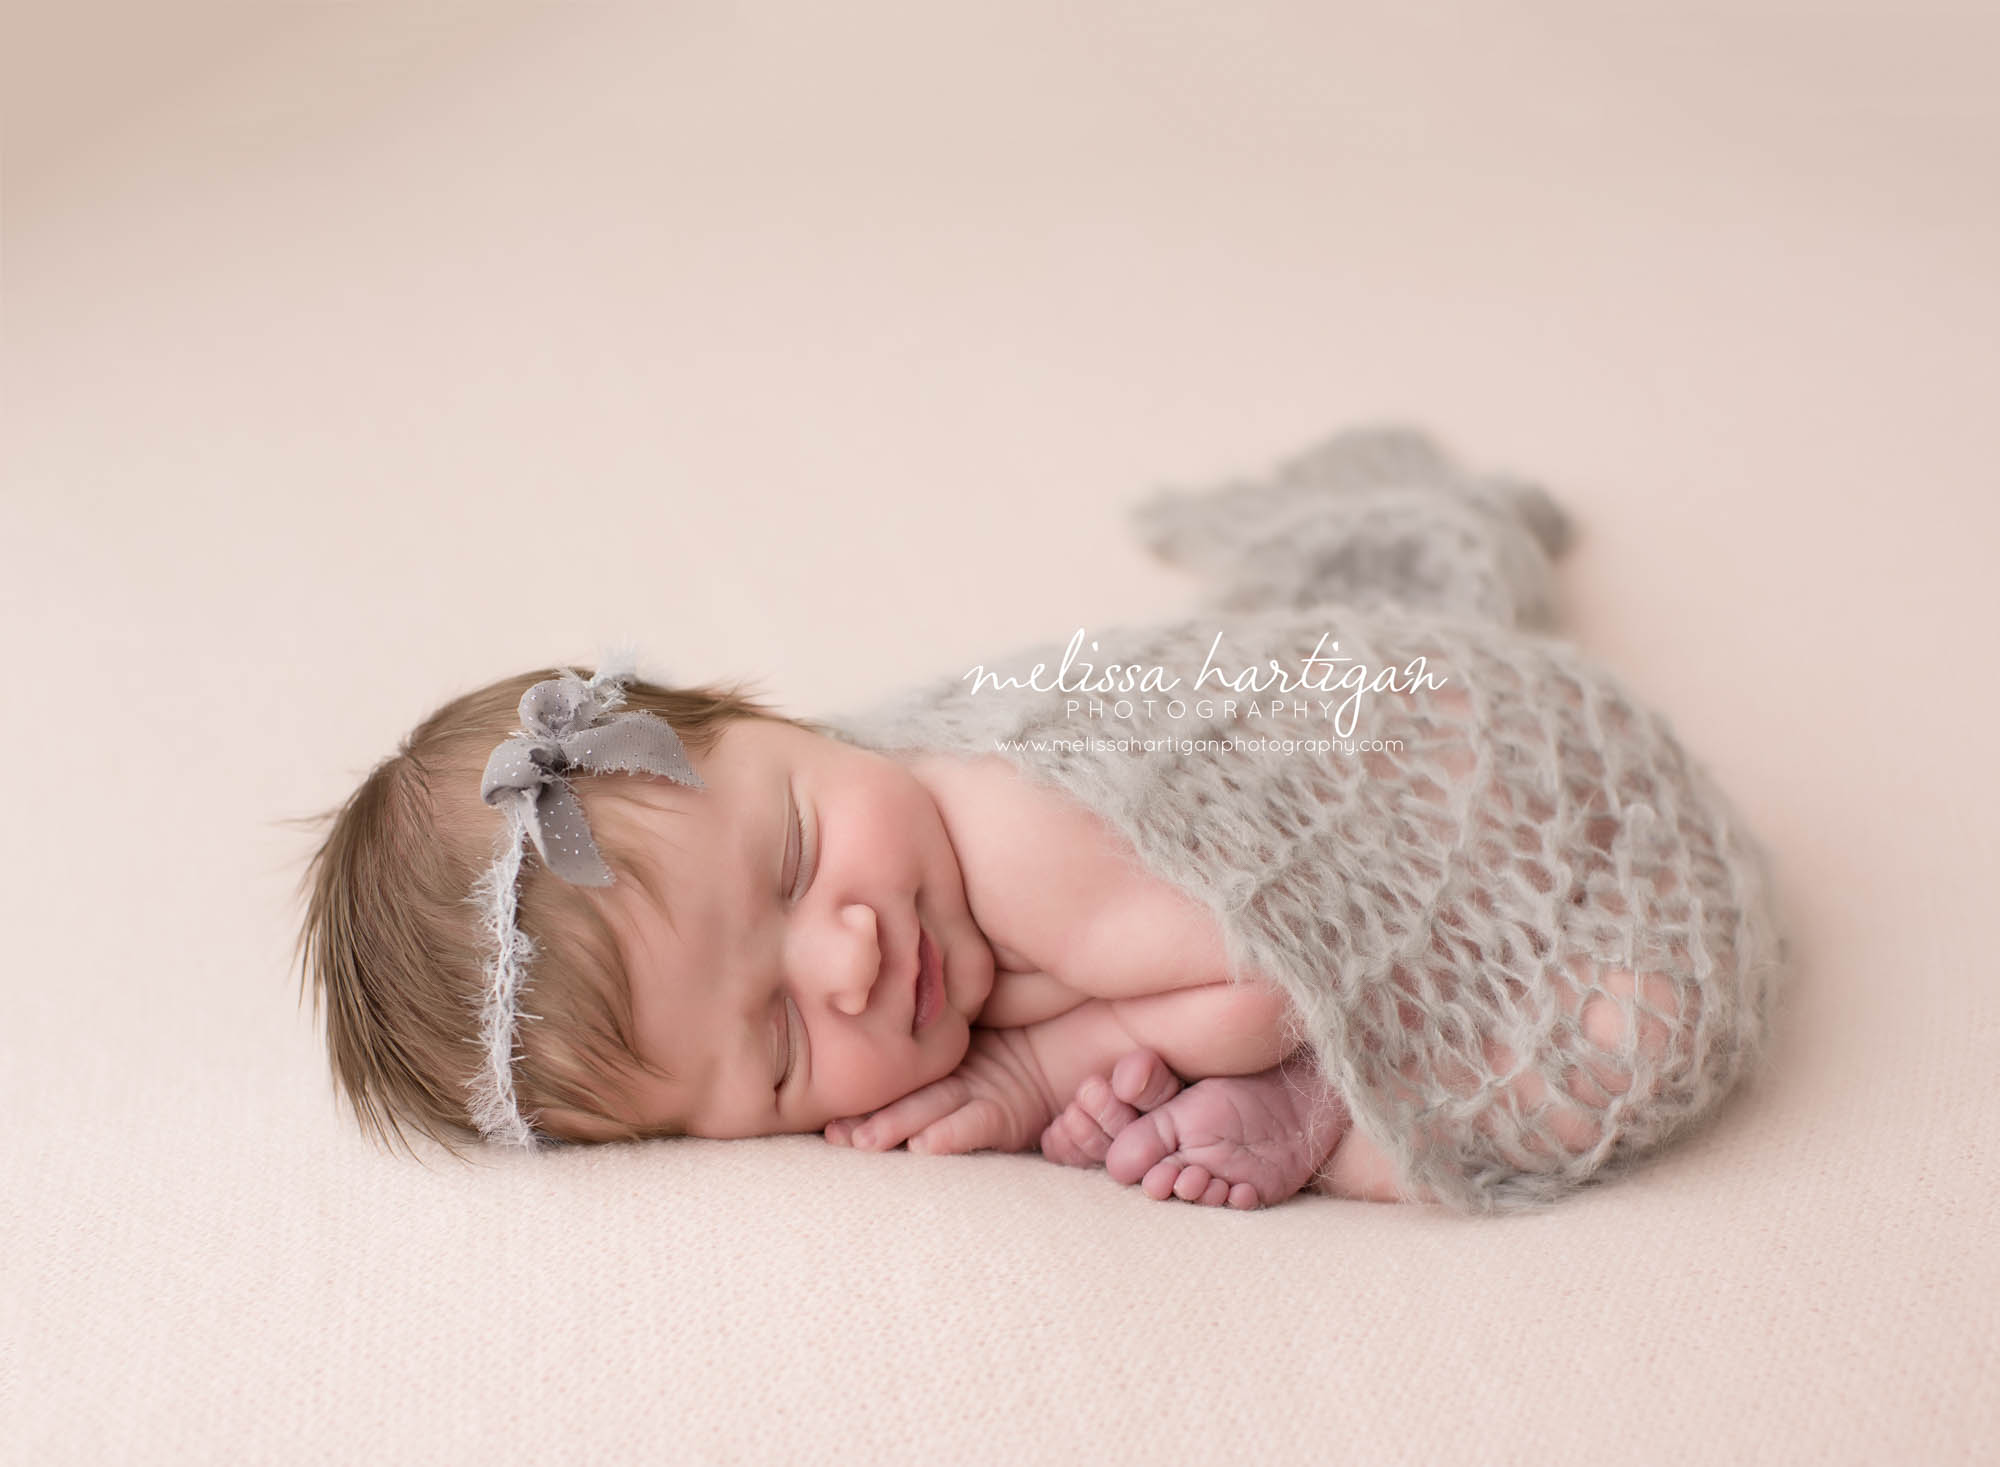 Melissa Hartigan Photography Connecticut Newborn Photographer Coventry Ct Middlefield CT baby Fairfield county Newborn and maternity CT photographer Baby girl gray headband sleeping on pale pink blanket with gray knit wrap